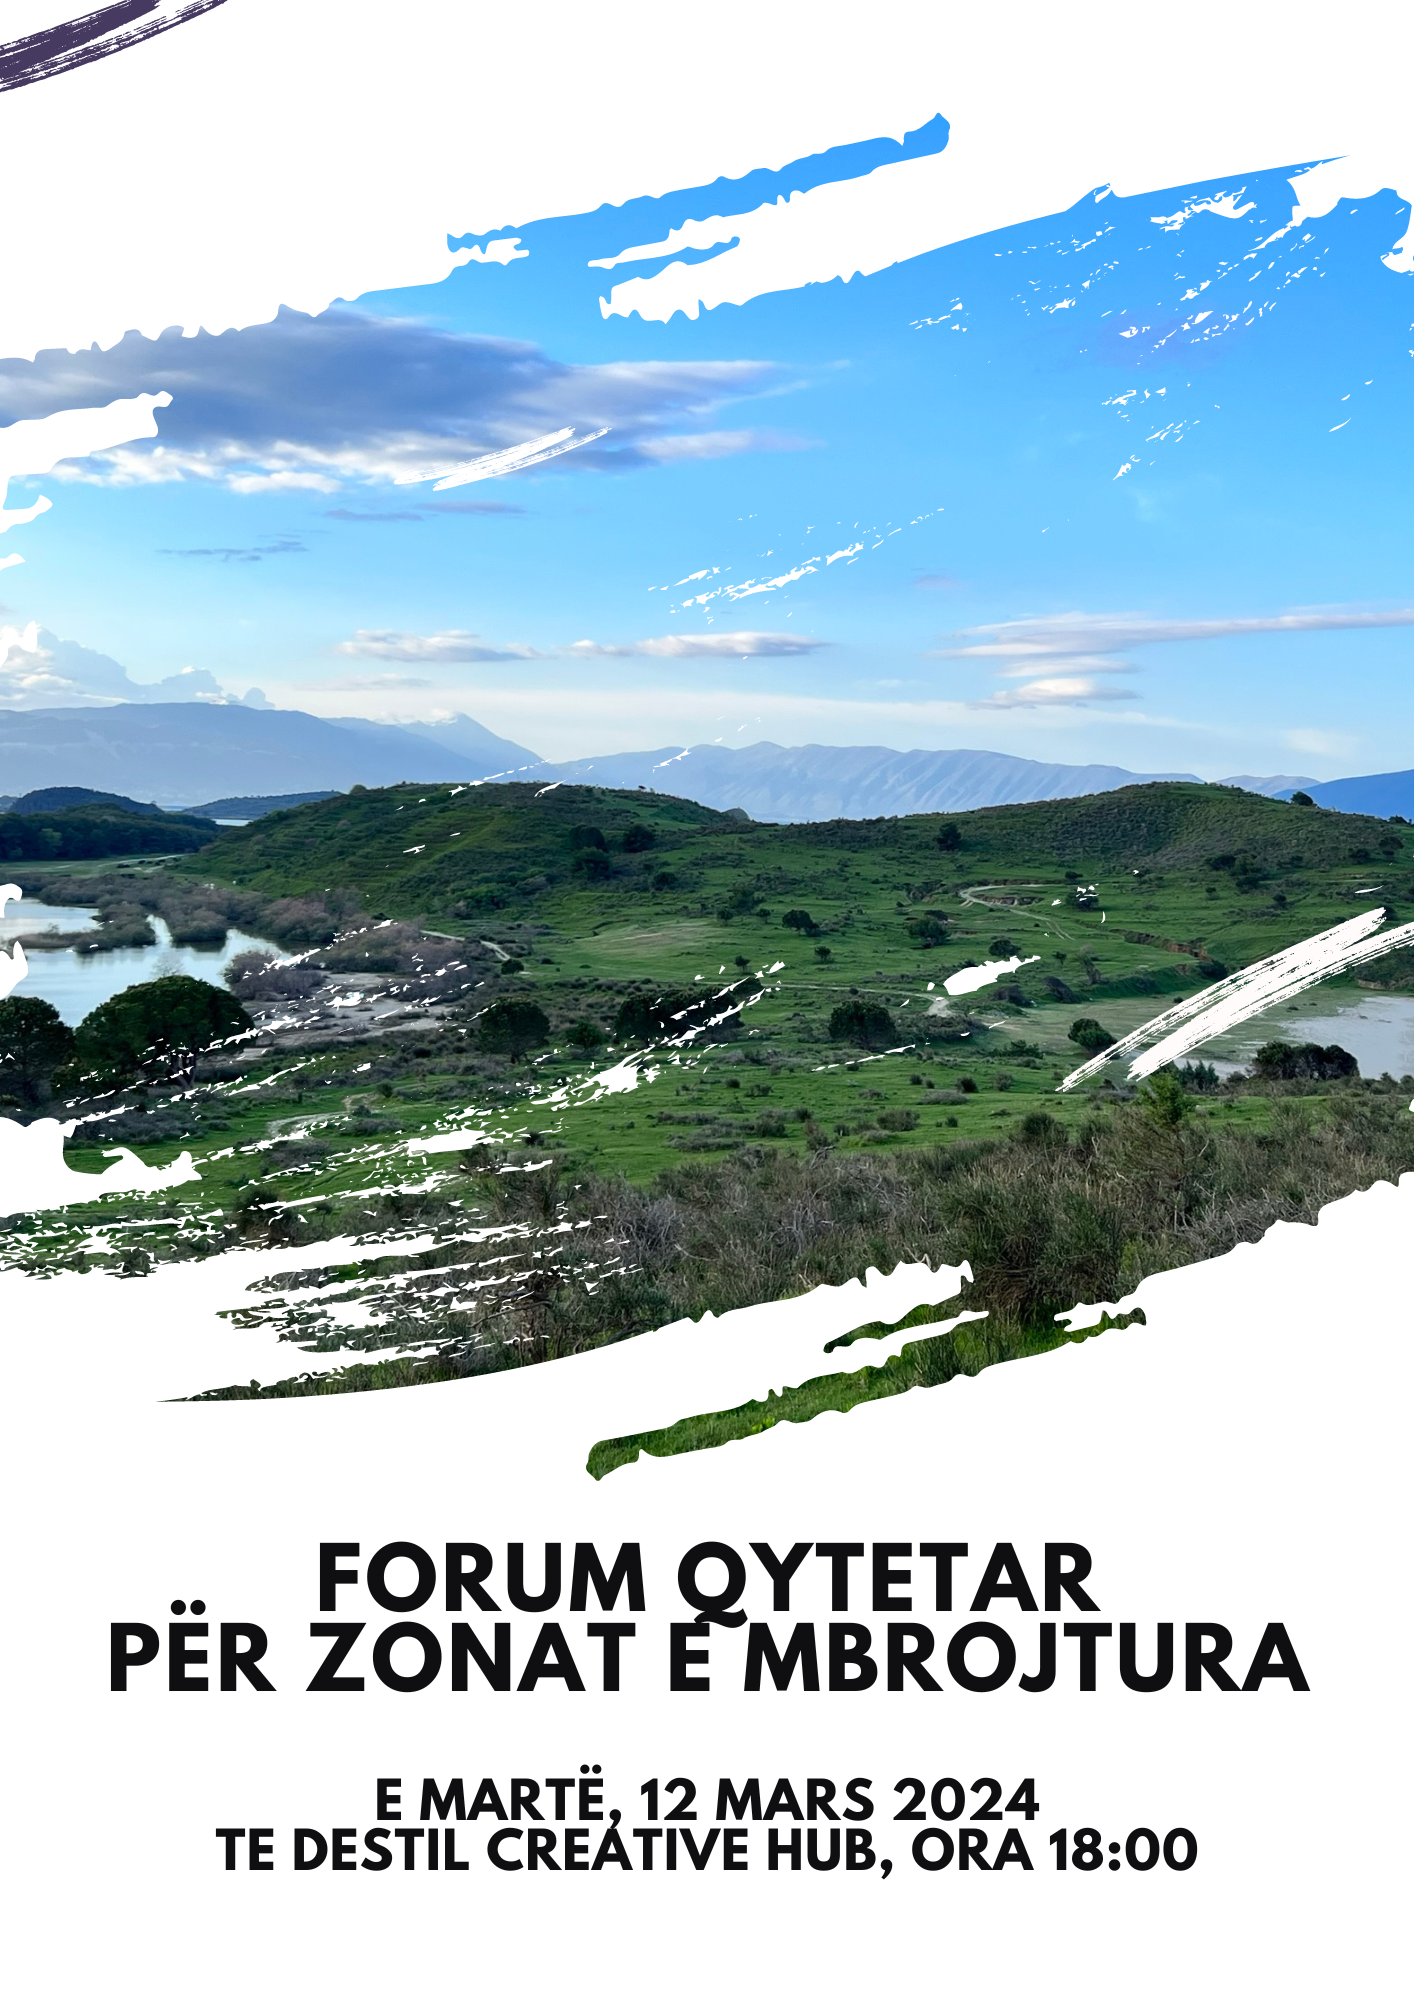 JOIN US FOR THE SECOND MEETING AT THE CITIZENS’ FORUM FOR PROTECTED AREAS